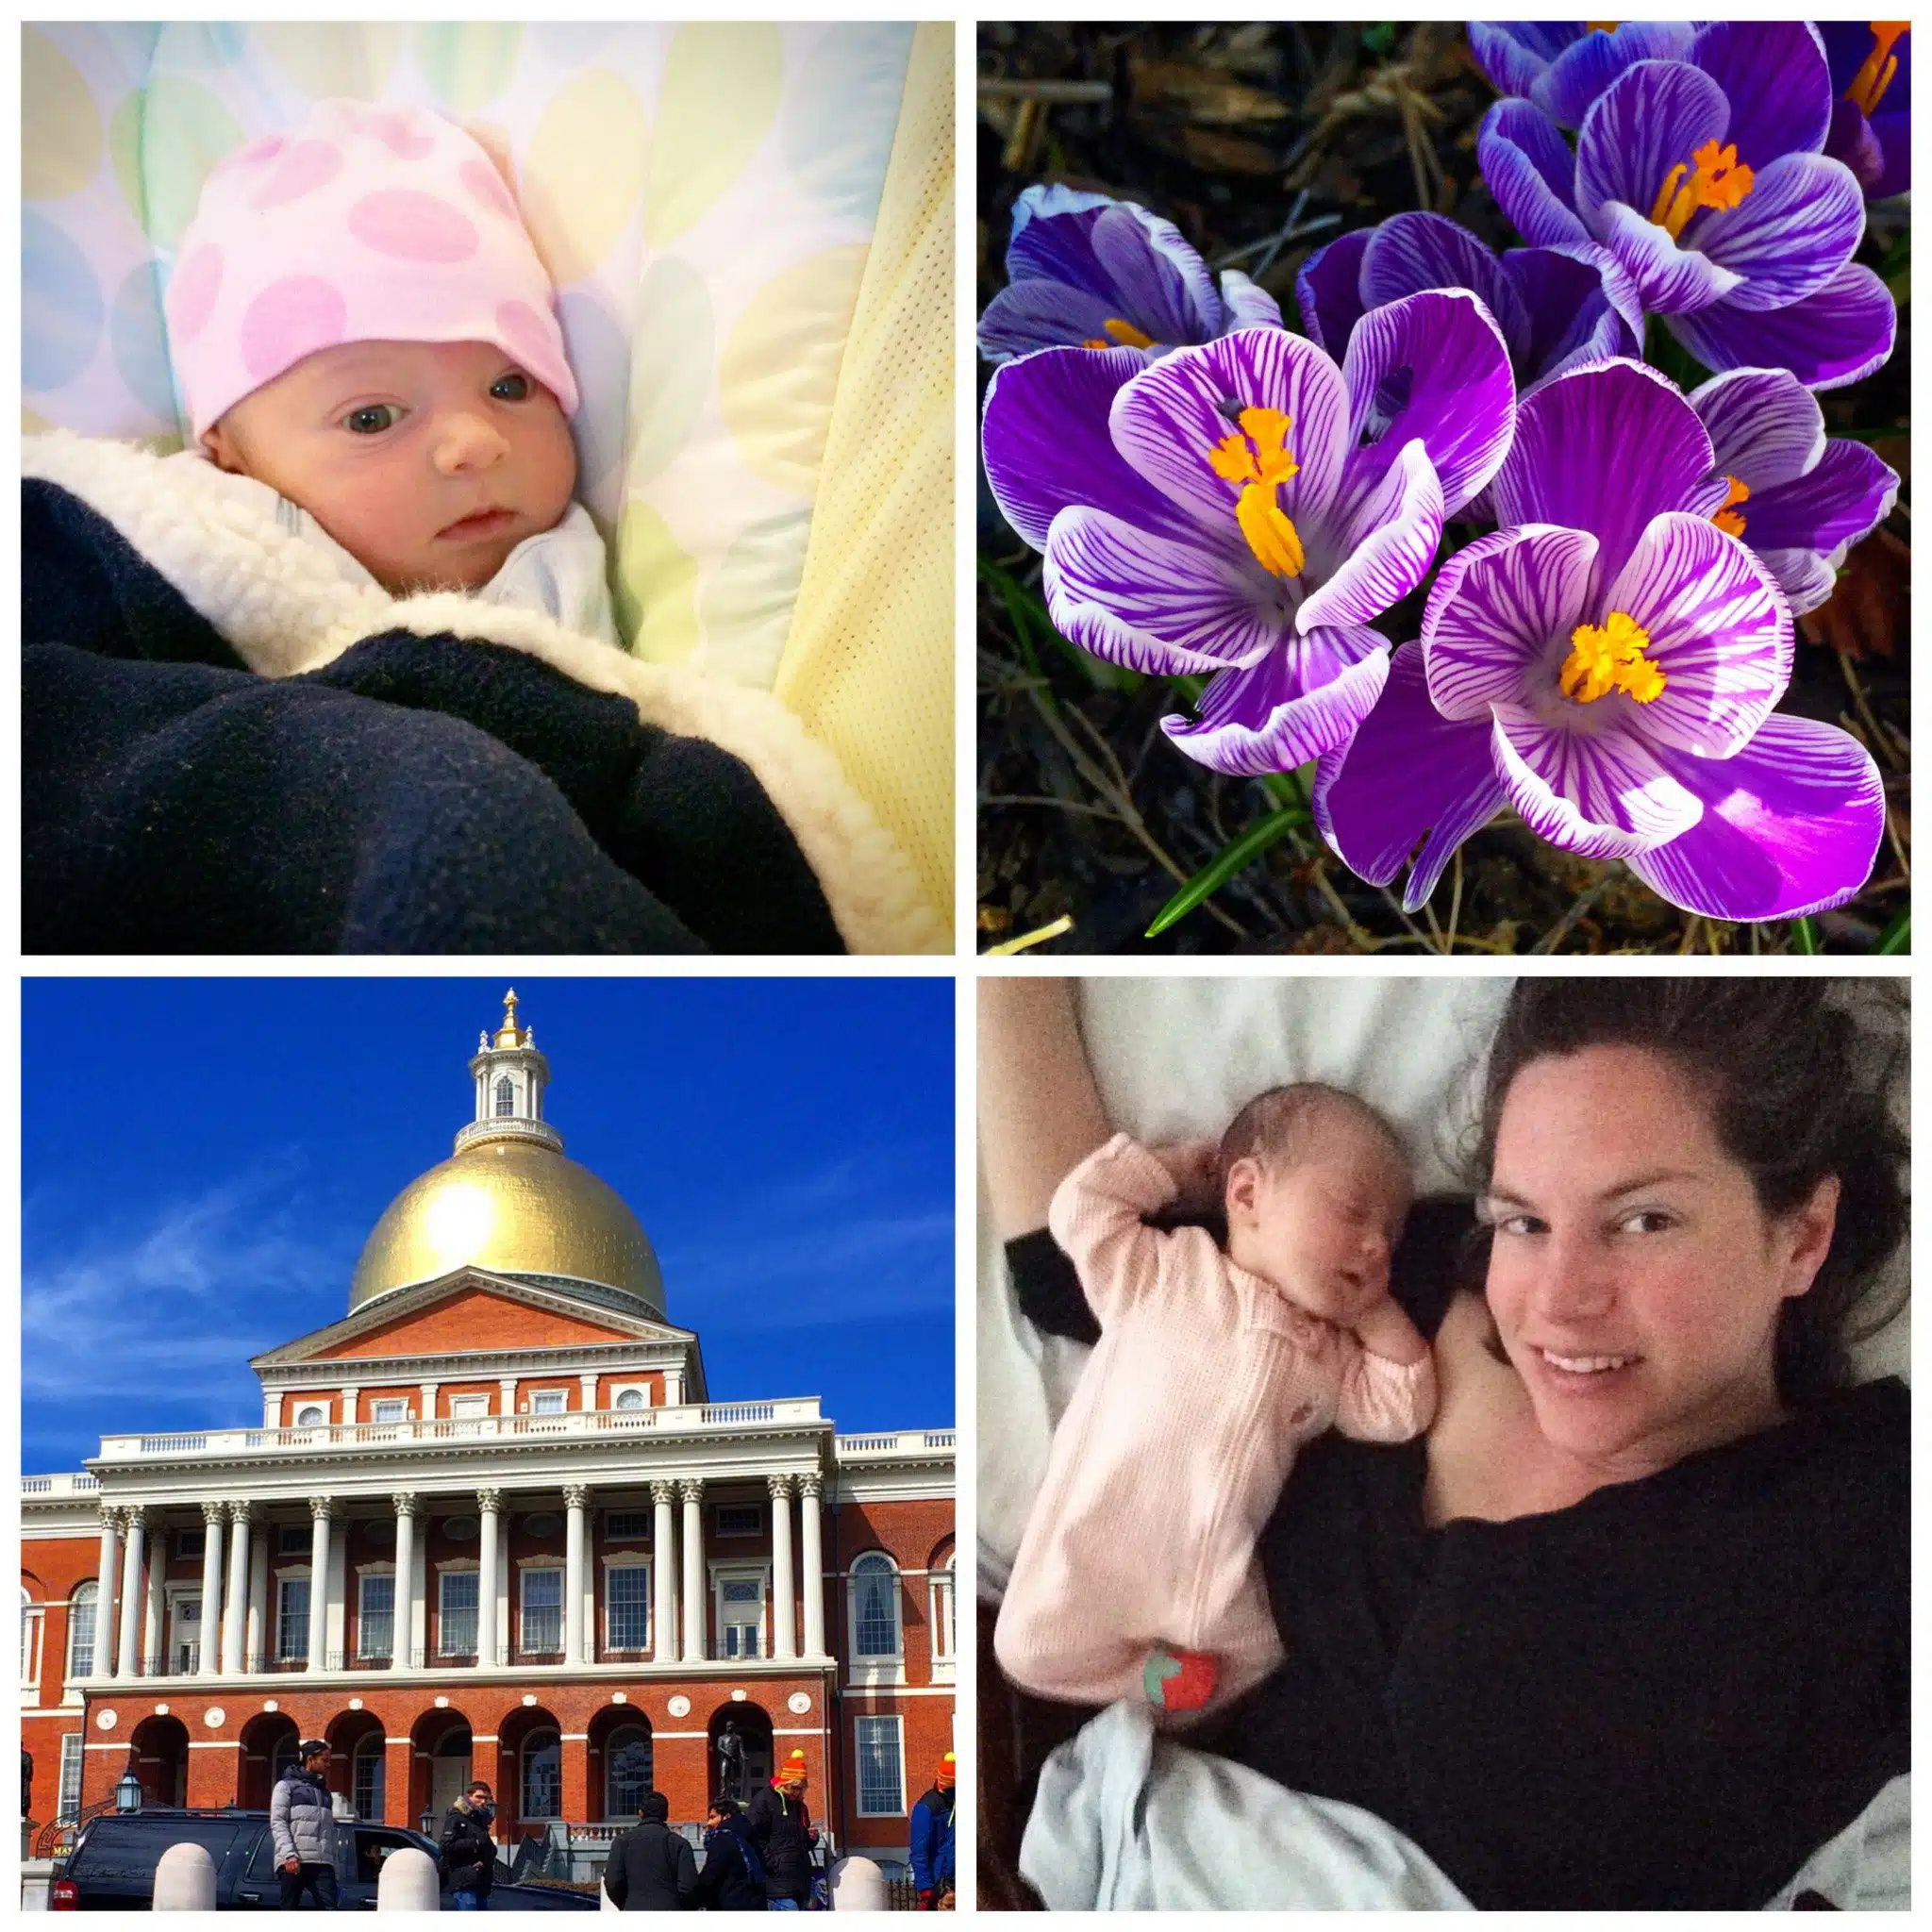 With all that milk, baby is growing like the spring flowers and shining like Boston's golden dome!